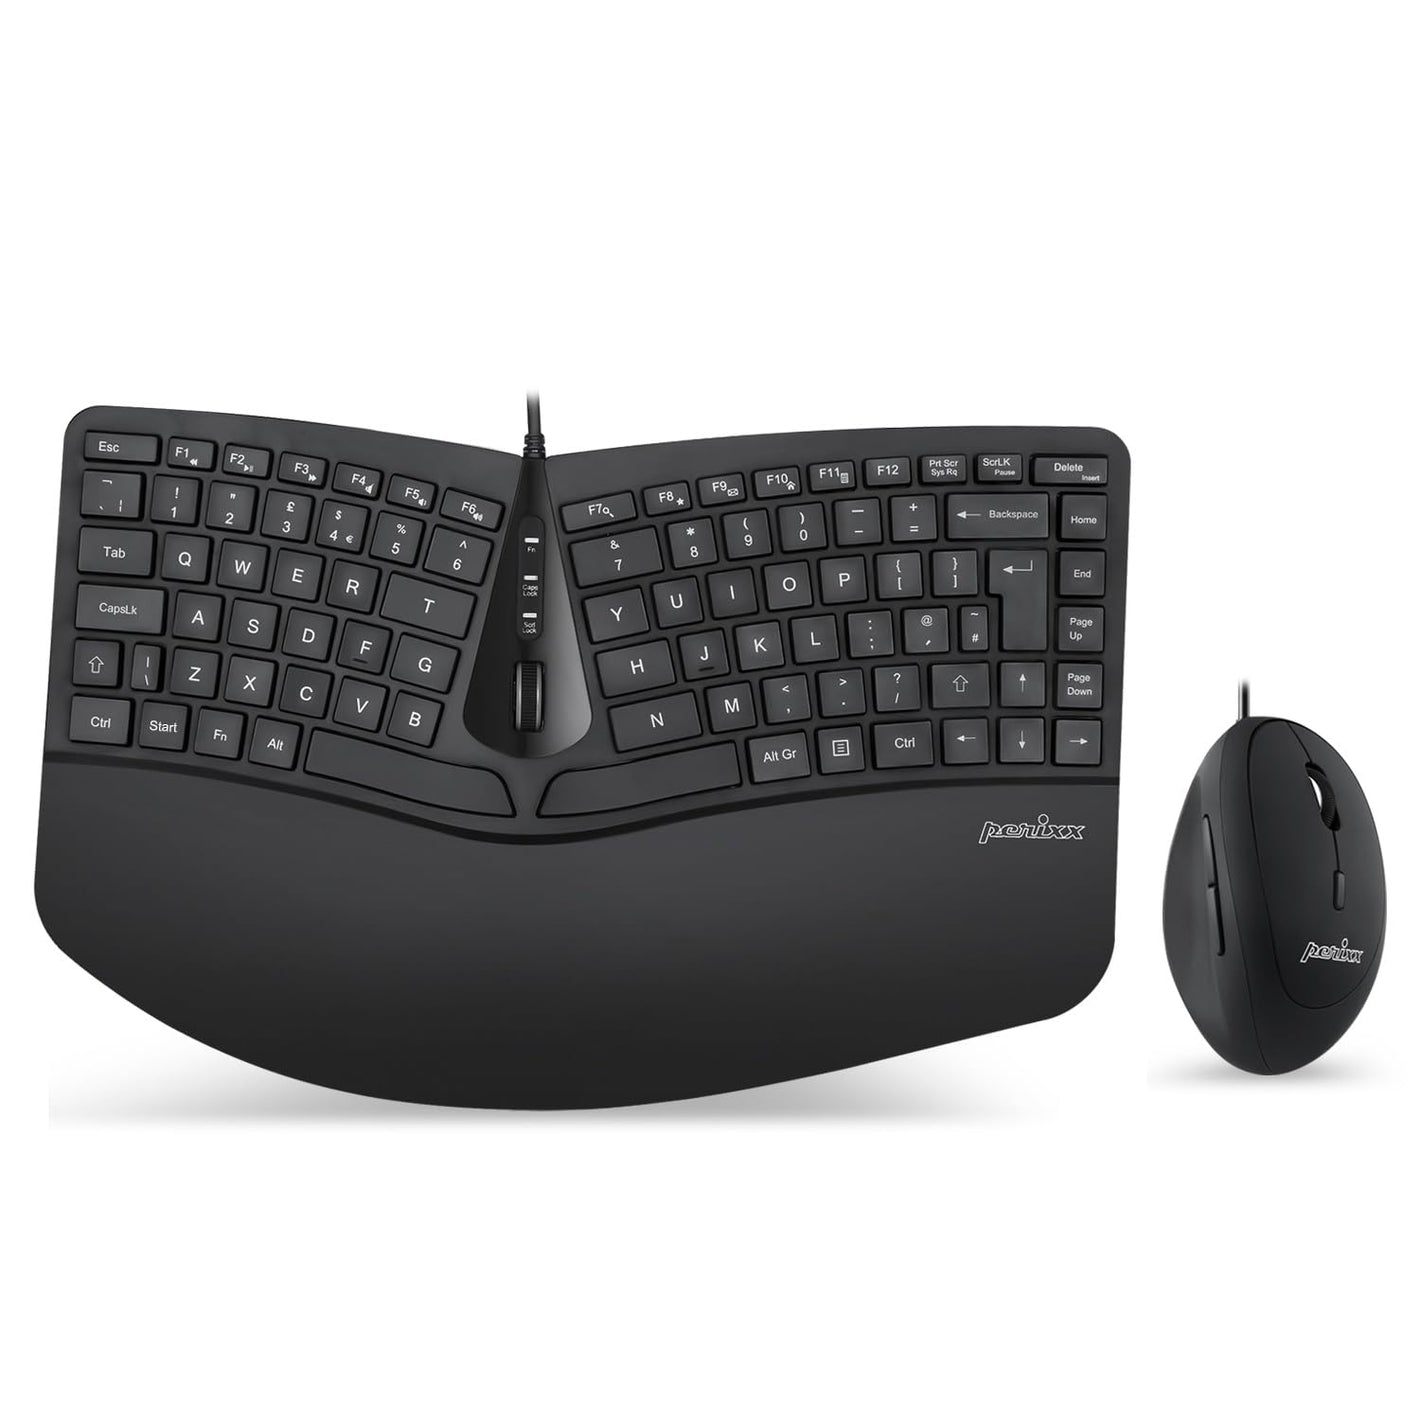 Perixx Periduo-406, Wired Mini Ergonomic Split Keyboard and Vertical Mouse Combo with Adjustable Palm Rest and Membrane Low Profile Keys, UK Layout